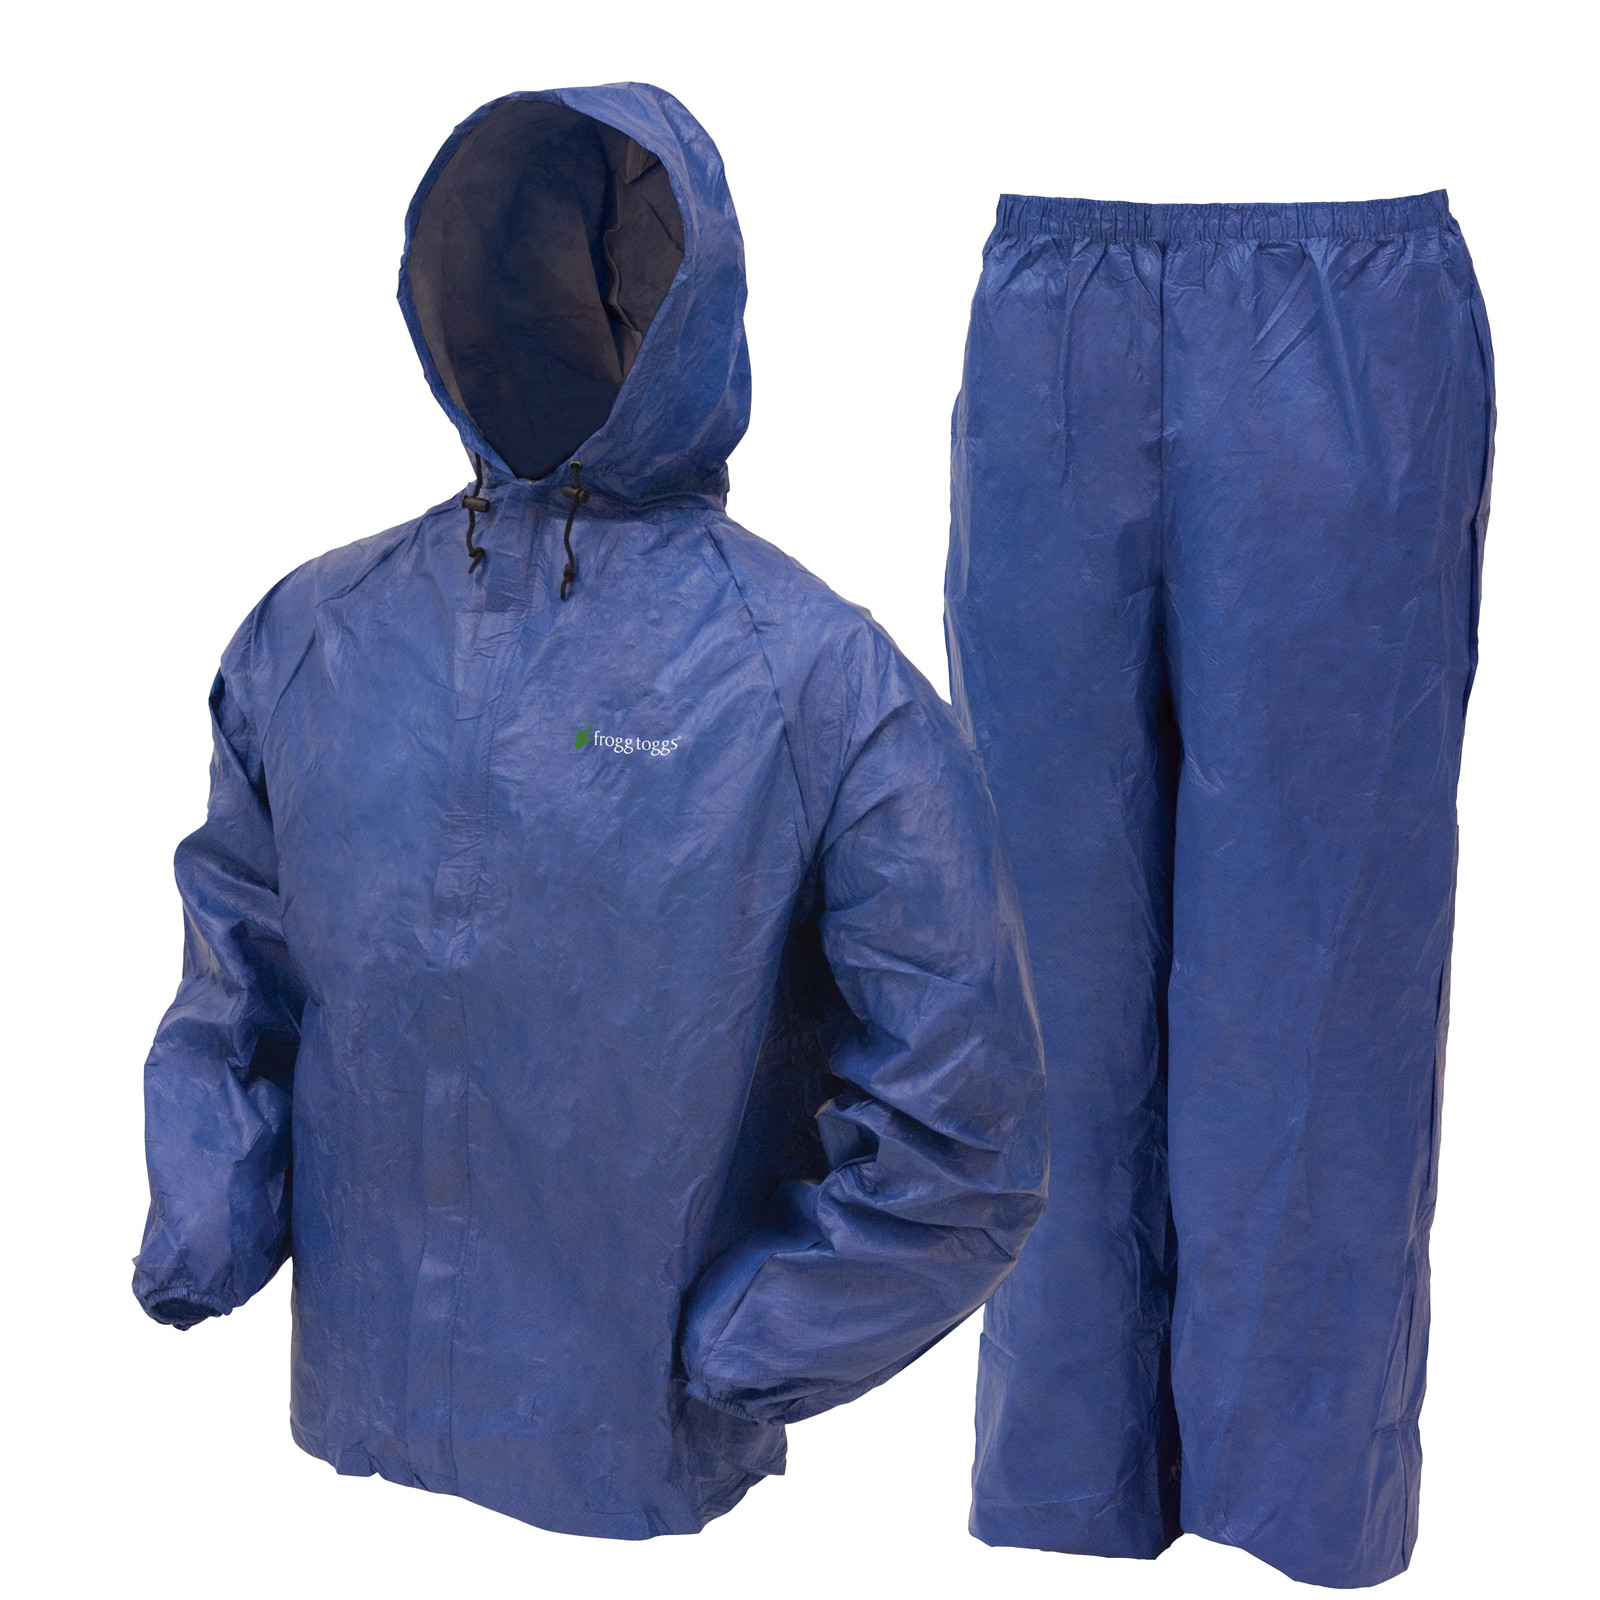 Youth Ultra-Lite² Suit